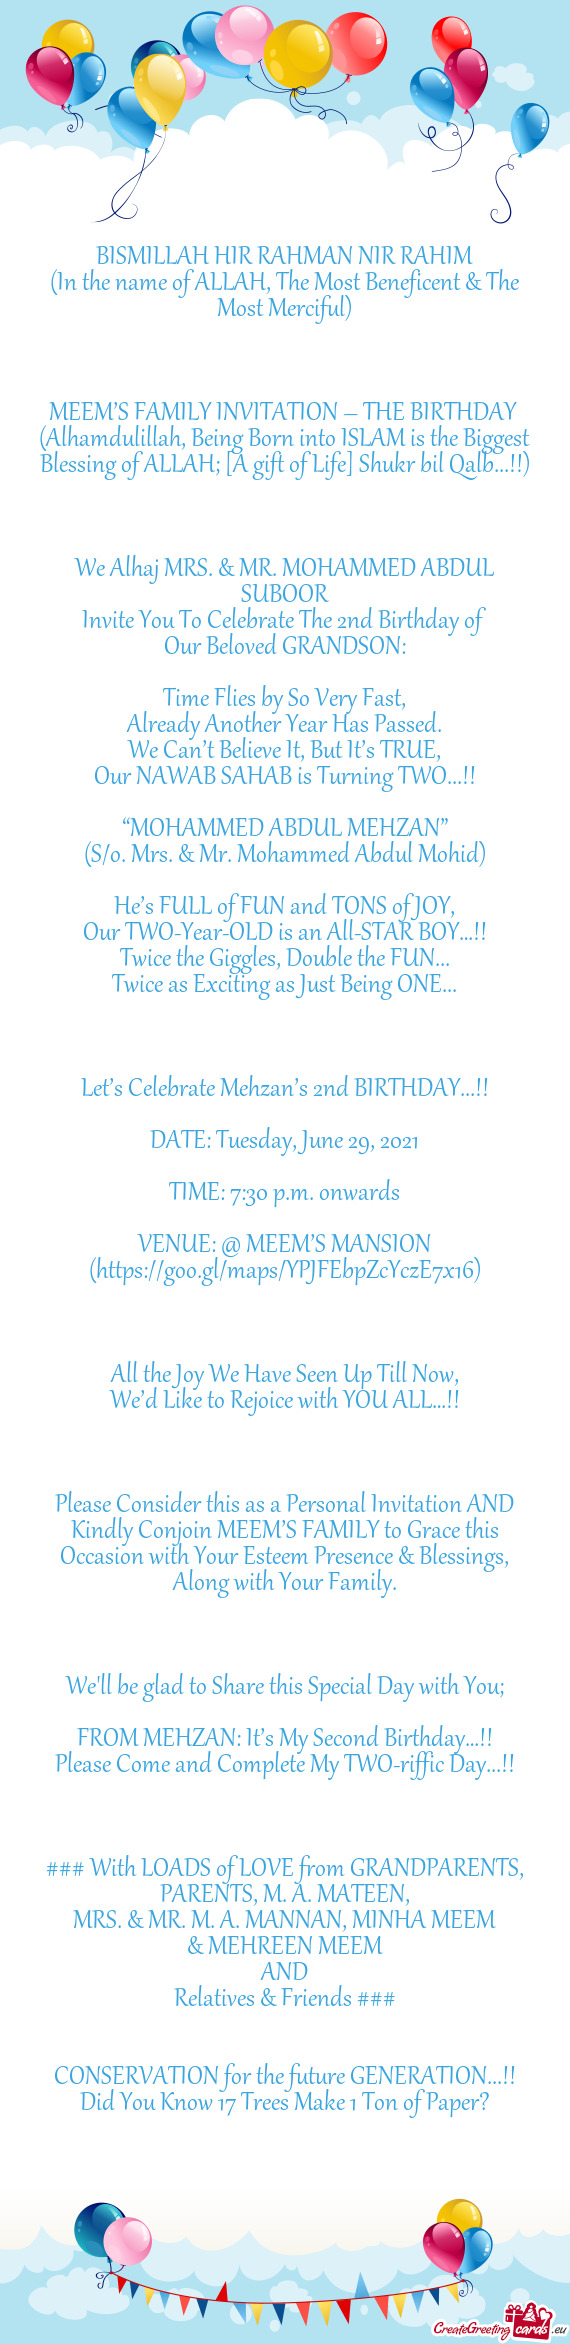 Invite You To Celebrate The 2nd Birthday of